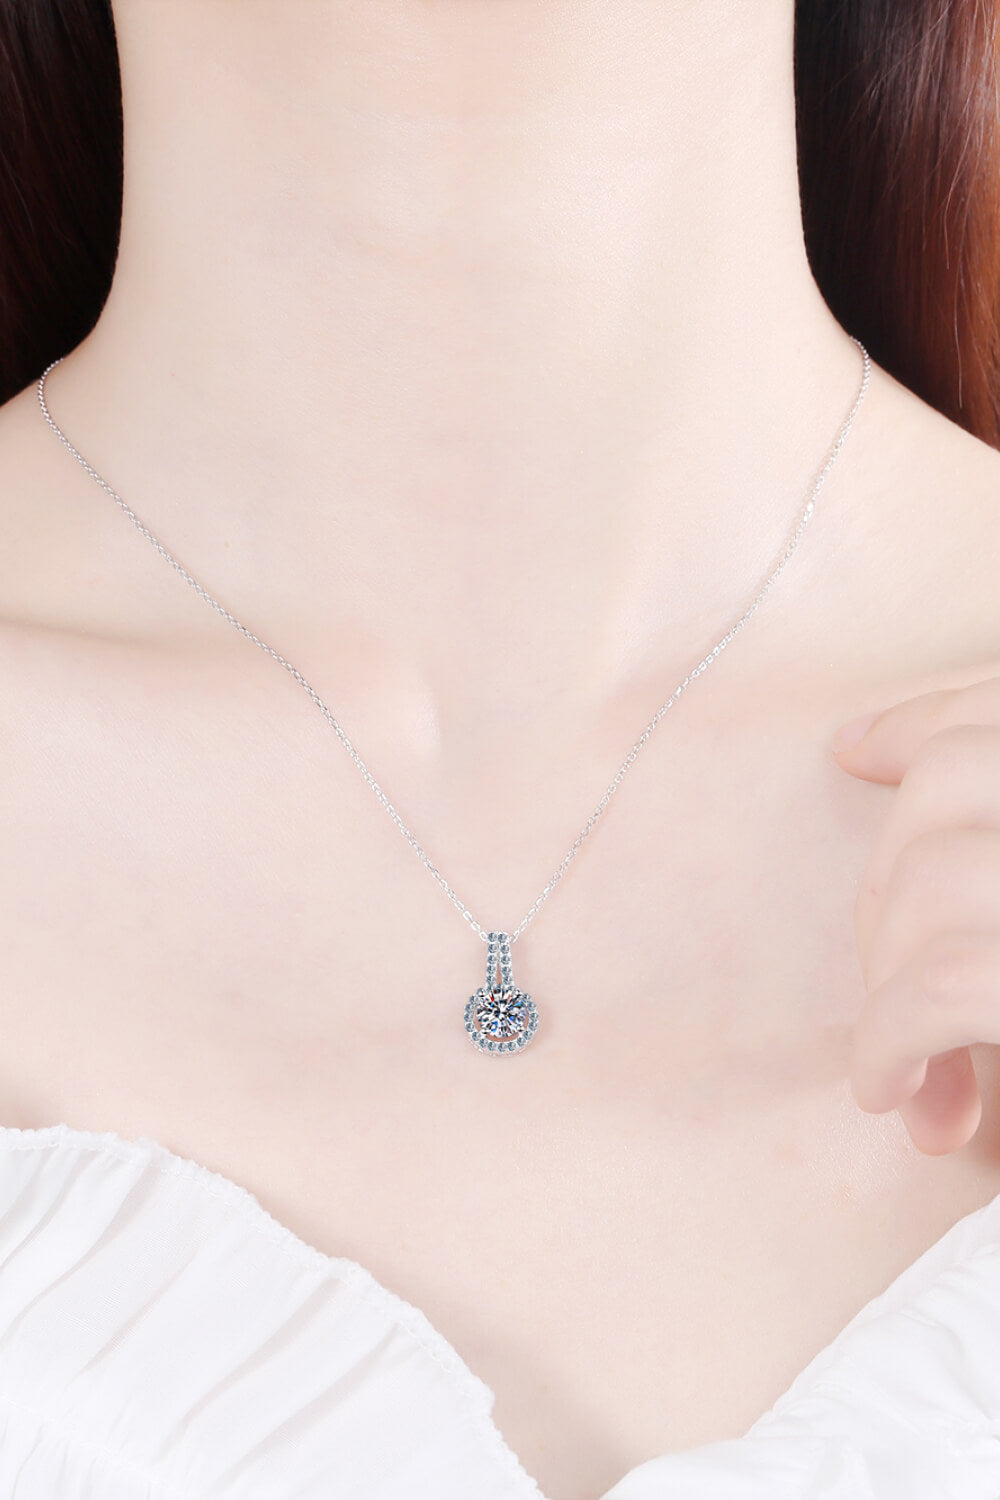 Build You Up Moissanite Round Pendant Chain Necklace